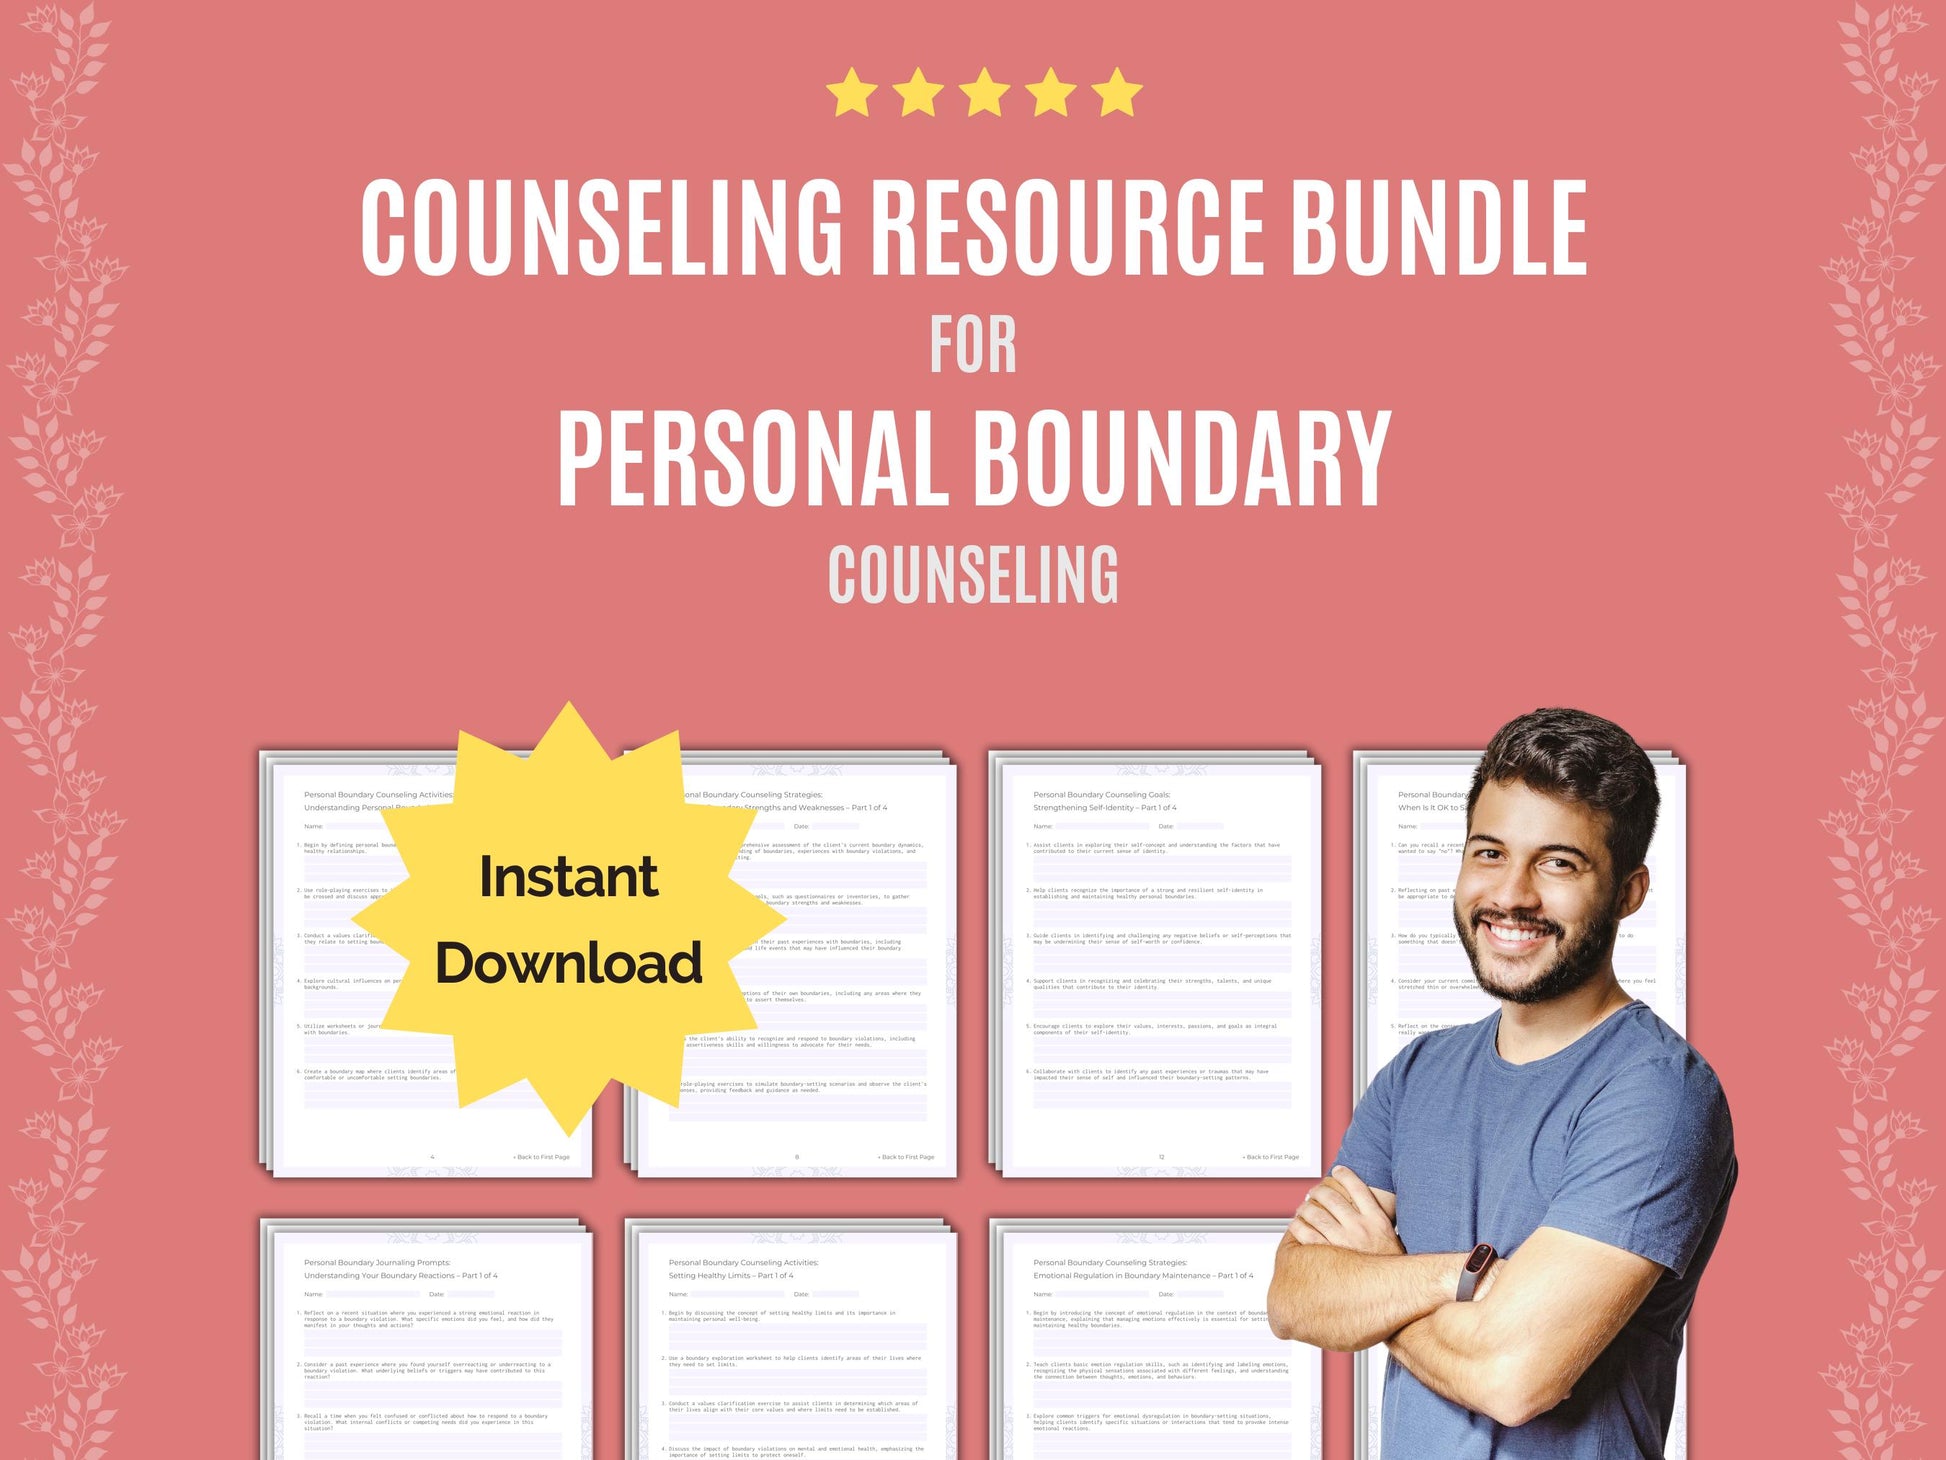 Personal Worksheet, Personal Tool, Counselor, Personal Bundle, Personal Workbook, Therapist, Personal Template, Personal Idea, Personal Therapy, Boundary, Personal Resource, Mental Health, Personal Counseling